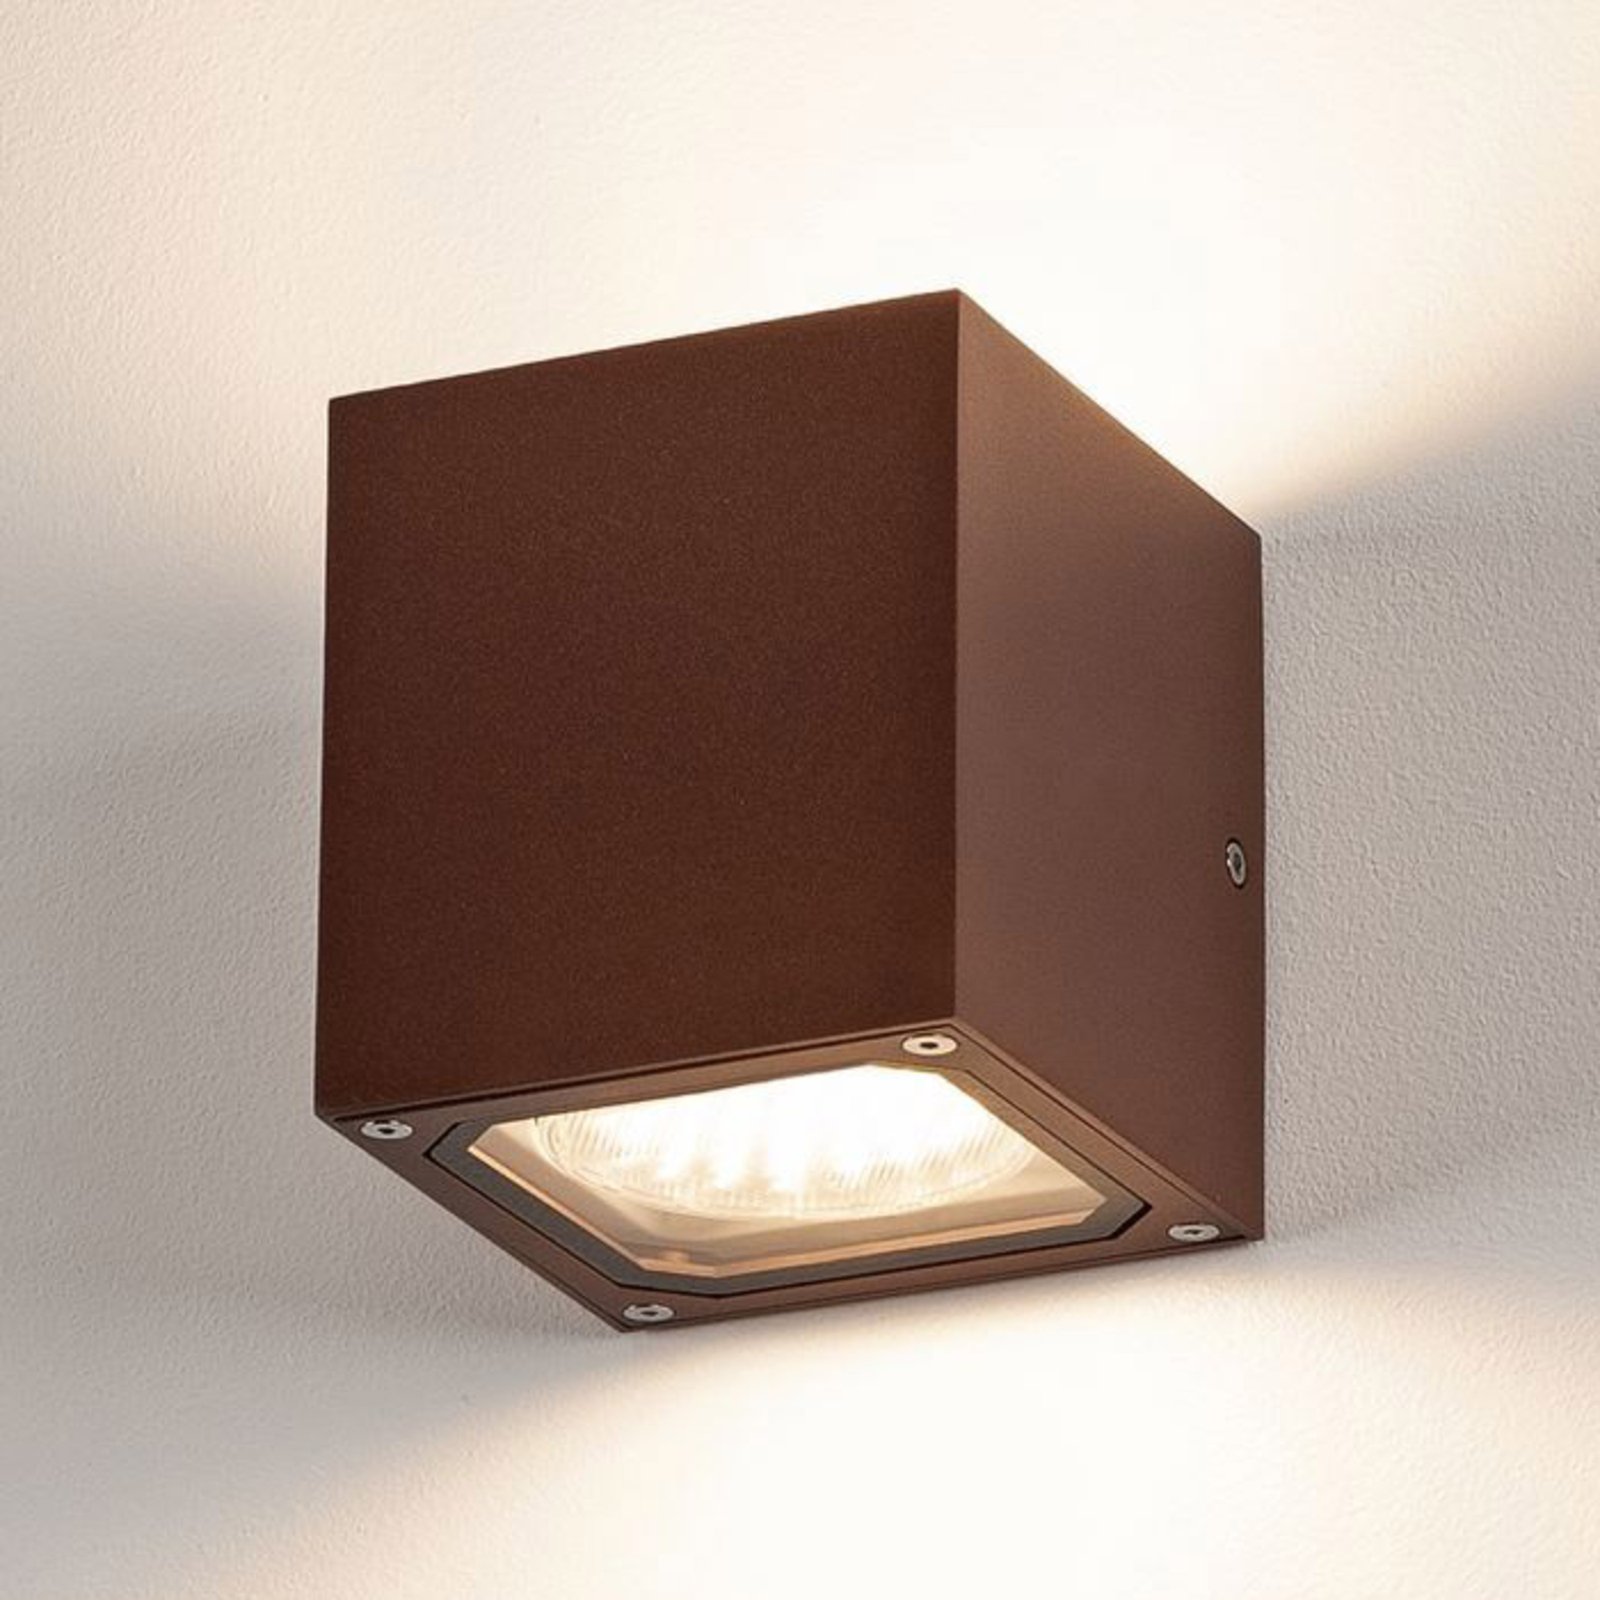 SLV Sitra Cube outdoor wall light, rust brown